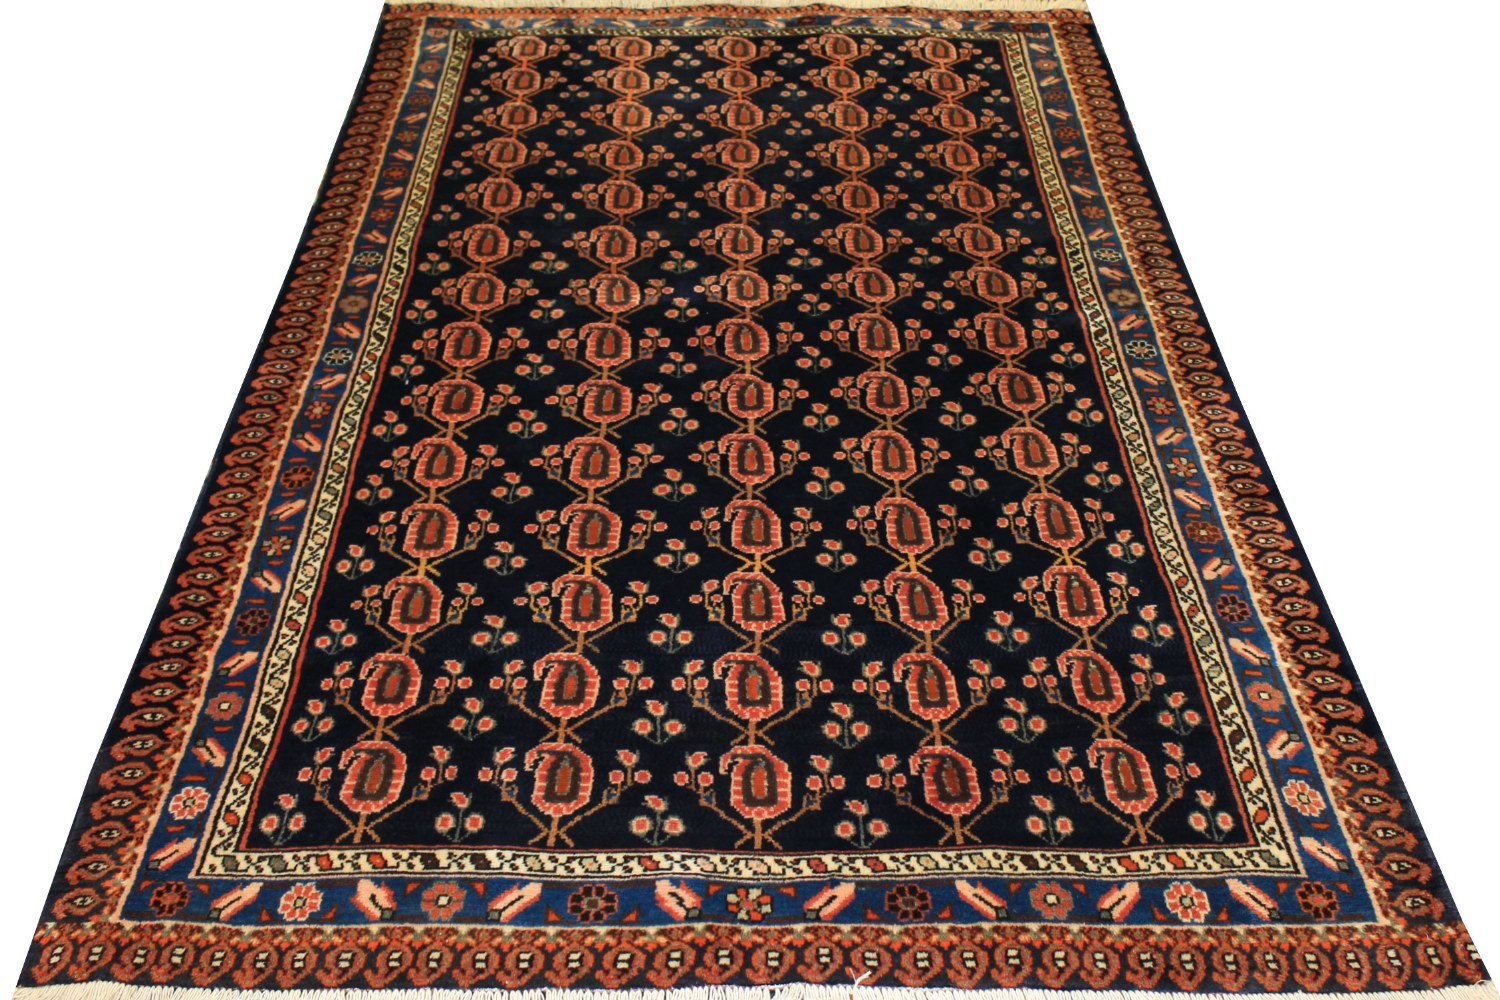 5x7/8 Traditional Hand Knotted Wool Area Rug - MR0580